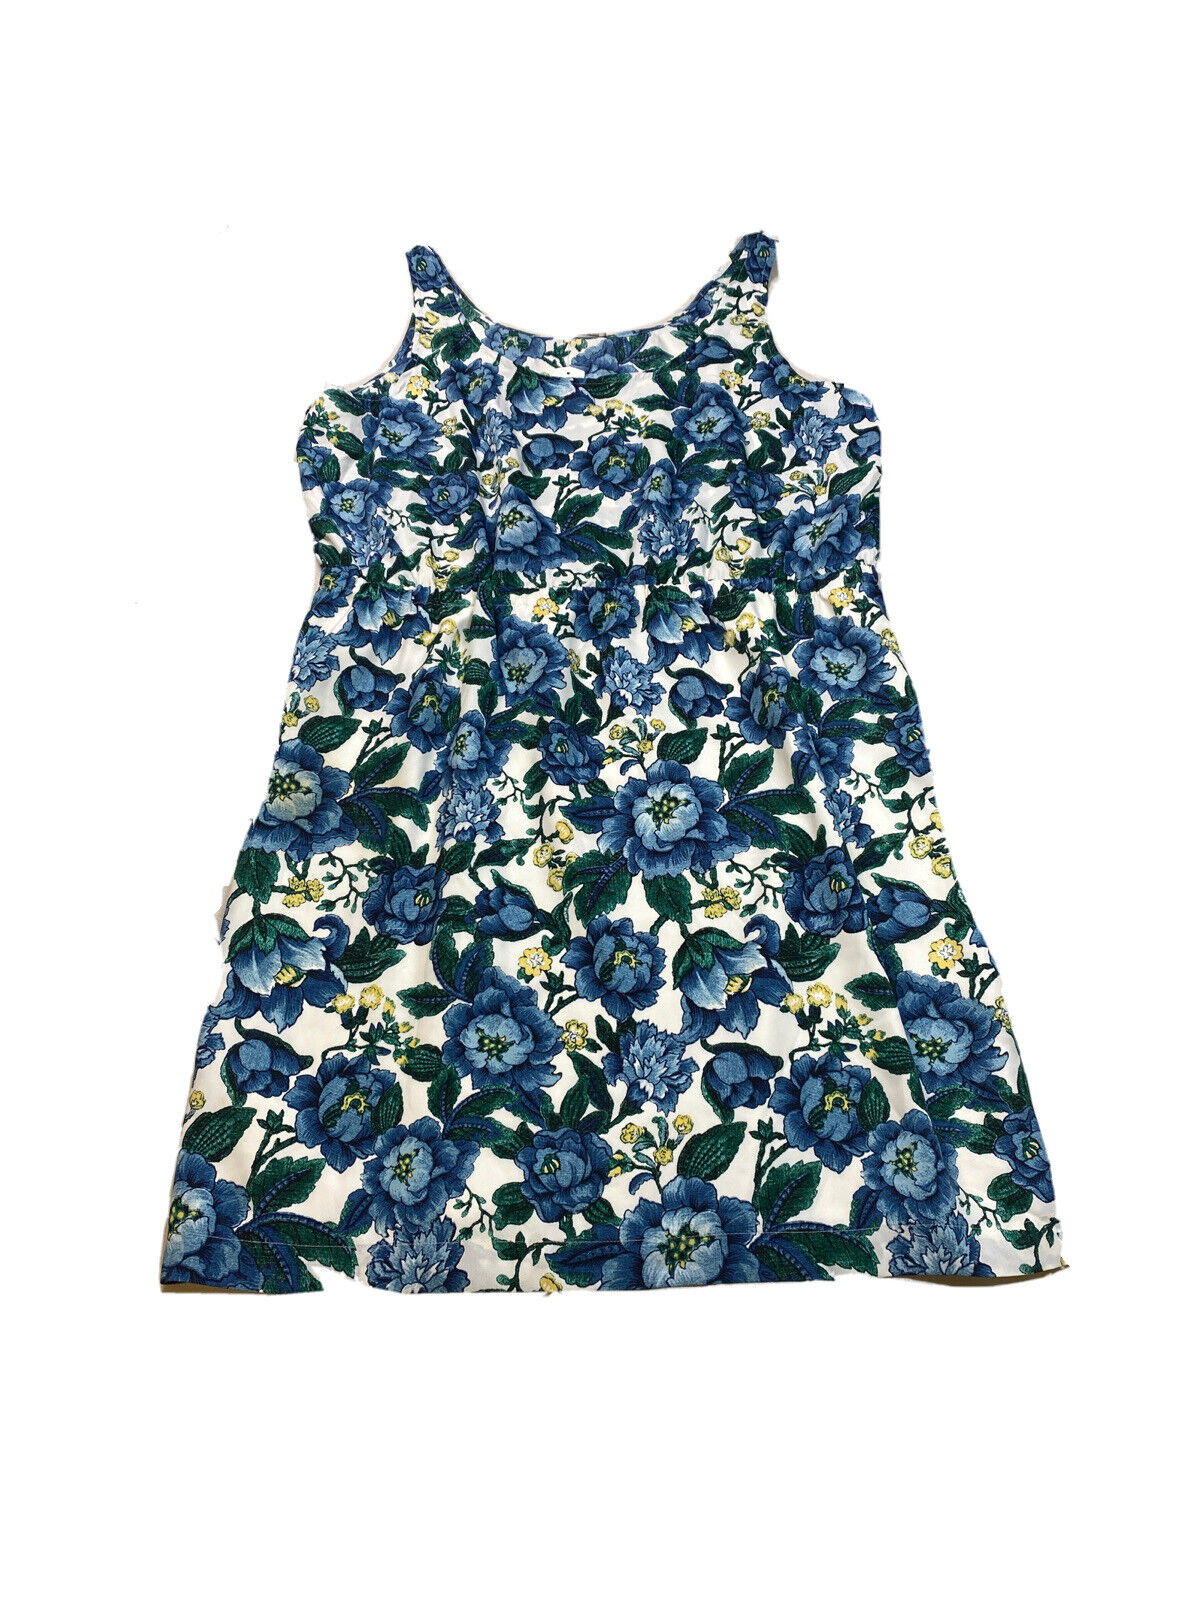 NEW LOFT Women's Blue/Green Floral Sleeveless Fit and Flare Dress - 16